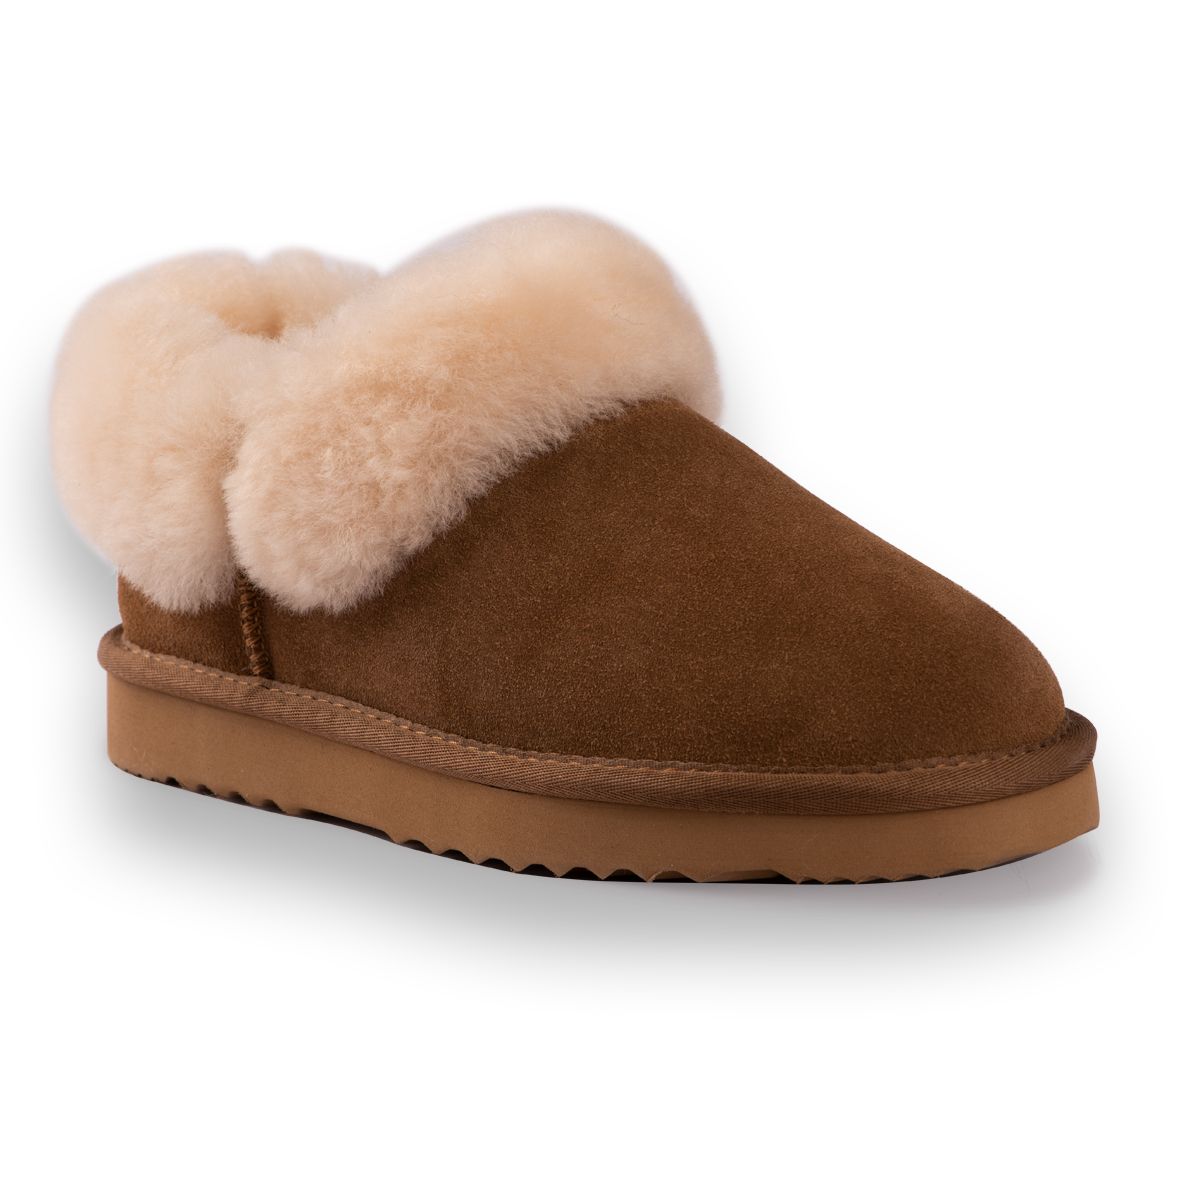 DETAILS    This traditional Ankle slipper for built comfort and support. The added sheepskin collar allows for that extra warmth, still providing a stylish look.  Traditional slipper you will wear all year round Plush premium Australian sheepskin lining Water resistant Leather Upper  Full Australian sheepskin insole Stylish looking sheepskin collar Light weight EVA, rubber blend outsole - soft and extra cushioning  Sheepskin breathes allowing feet to stay warm in winter and cool in summer 100% brand new and high quality, comes in a branded box, suitable for gift